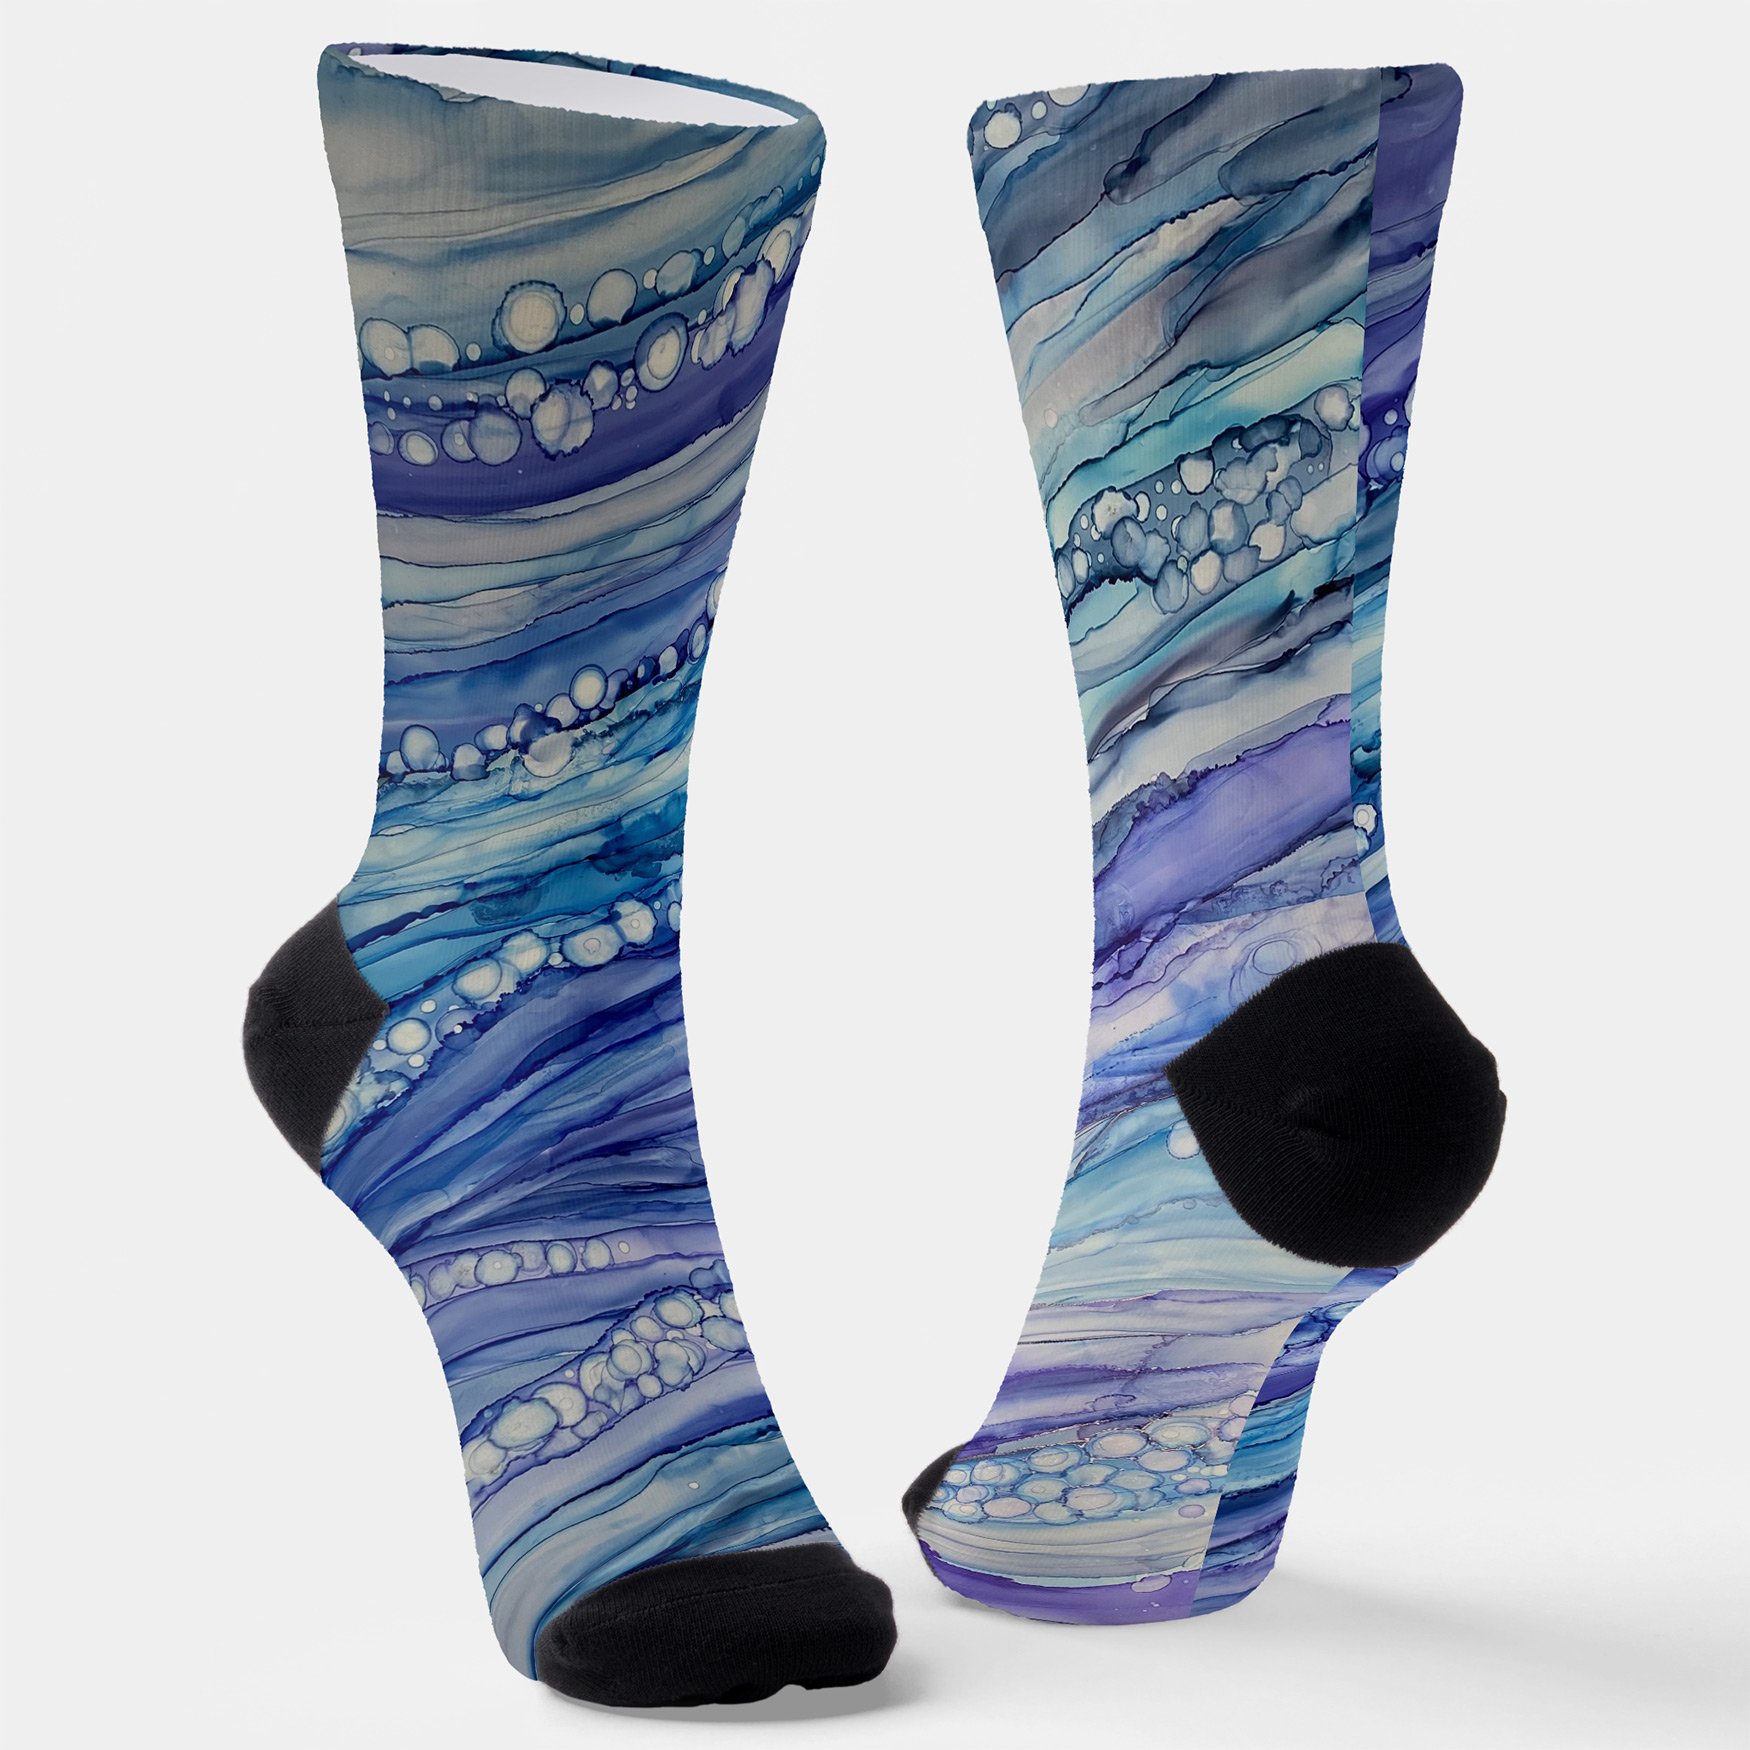 Abstract-Alcohol-Ink-Liquid-Art-Quirky-Whimsical-Blue-Purple-Socks.jpg